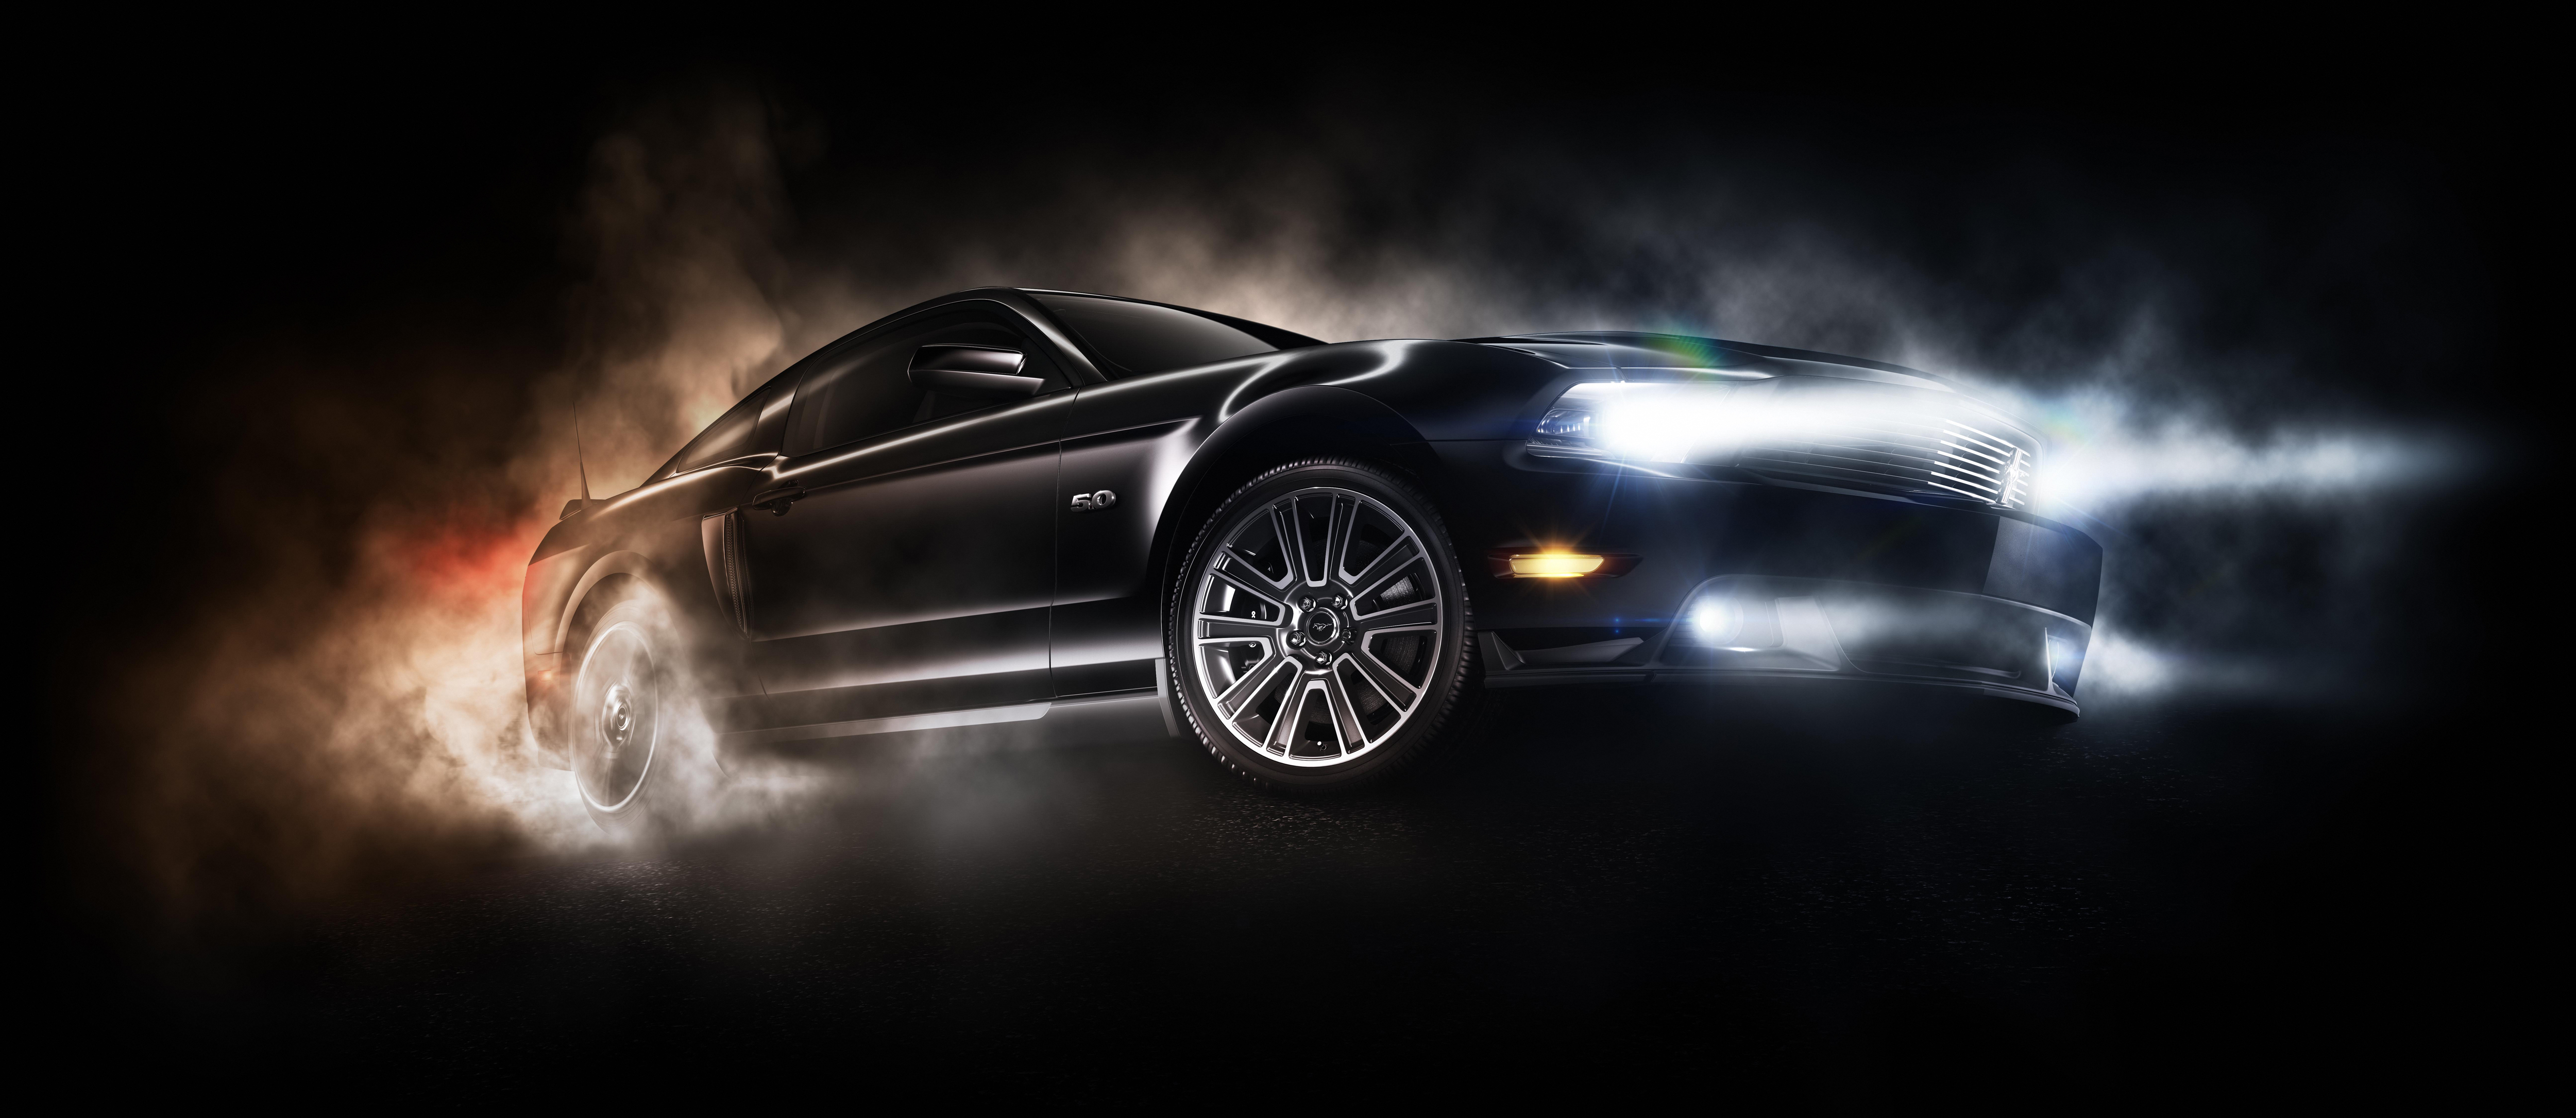 Mustang Burnout By Rob6015